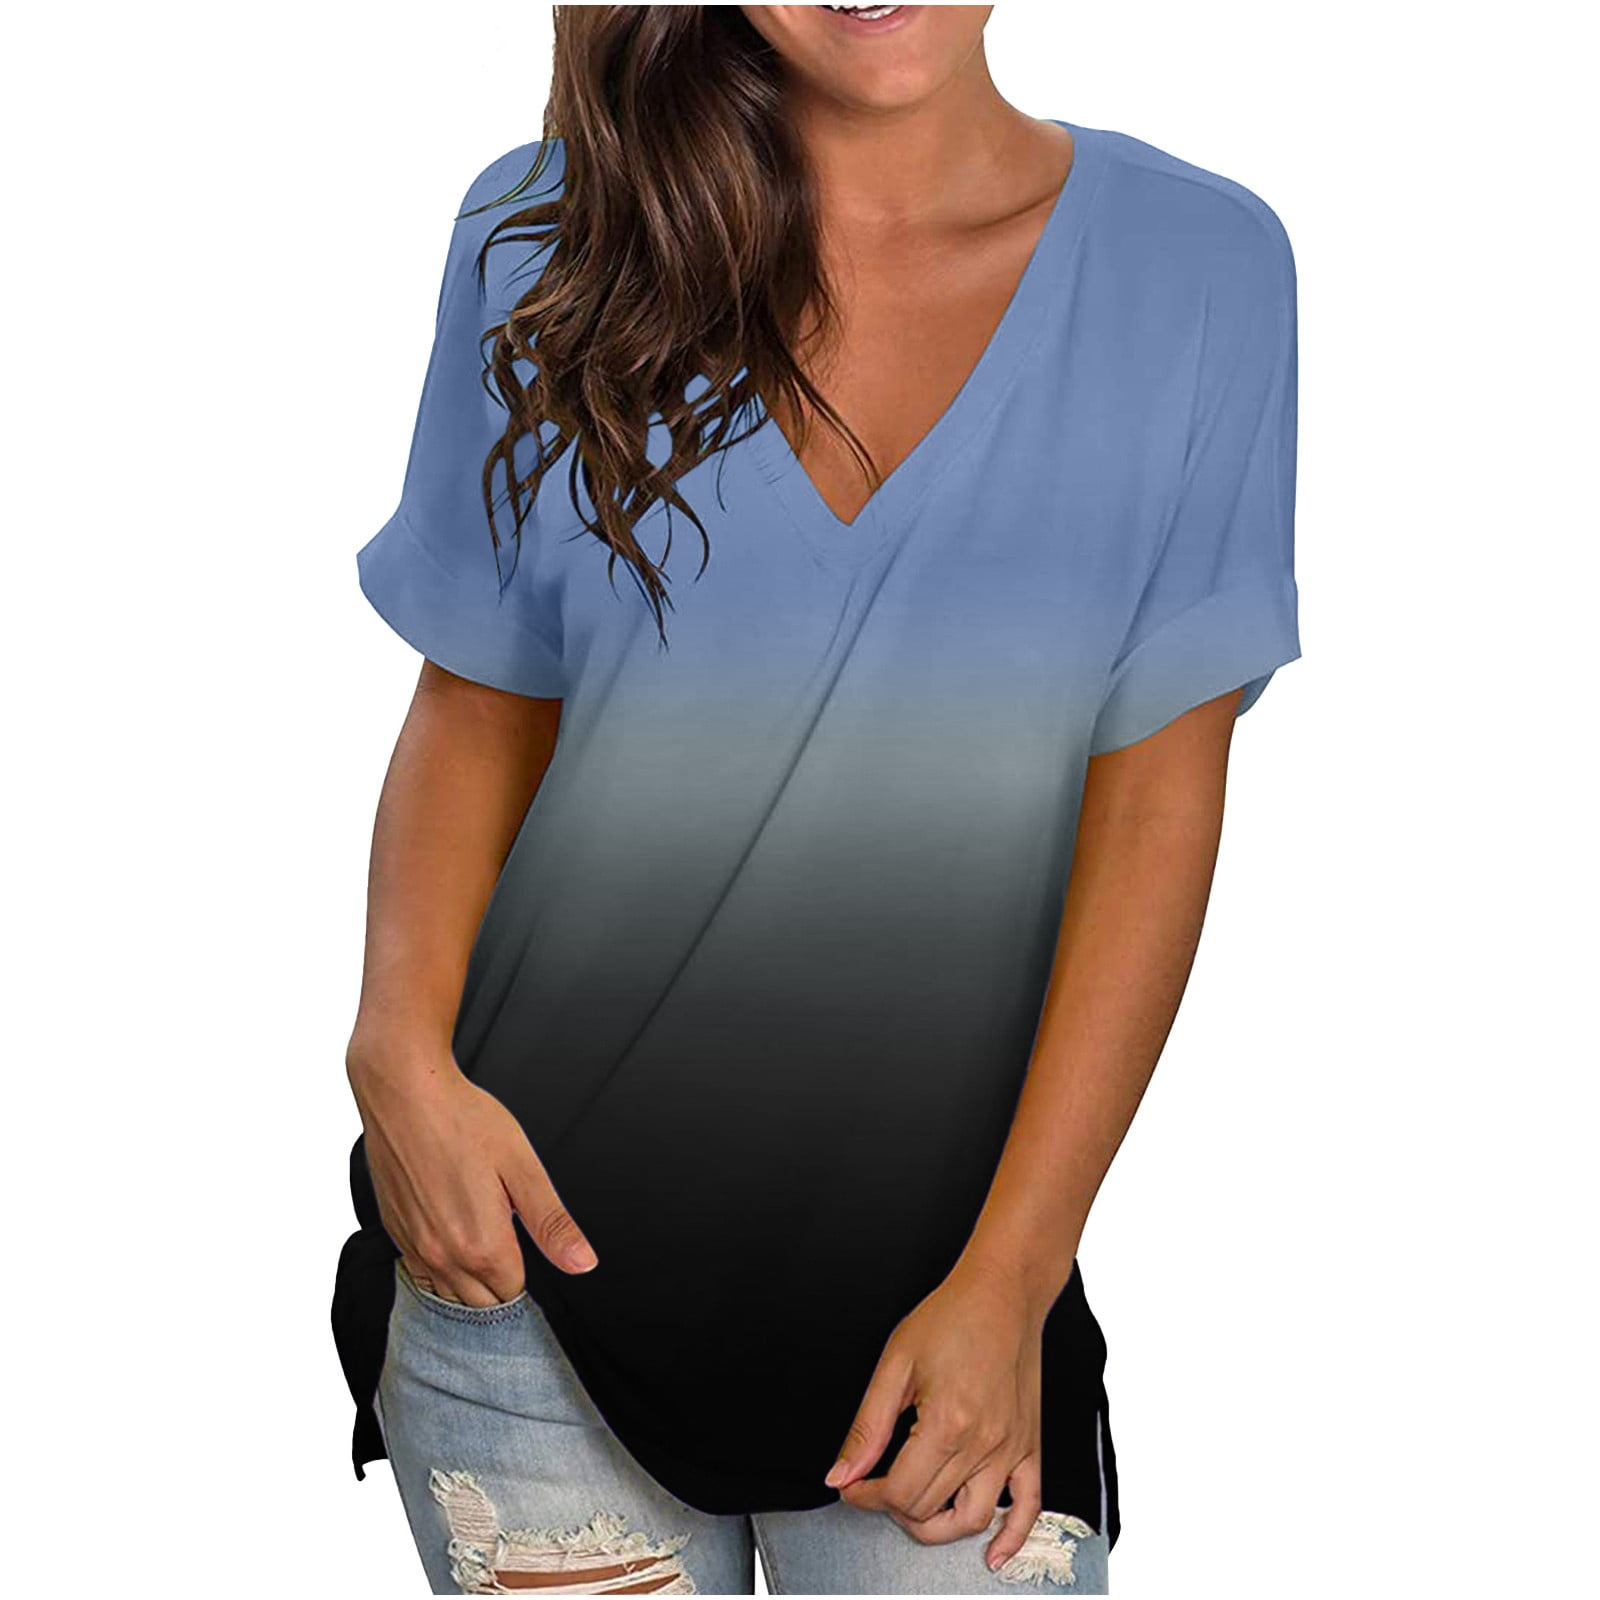 JGGSPWM Up to 50% Off Women Gradient Shirts Short Sleeve Summer Tshirts  Classic Fit Blouse Casual Loose Tunic V Neck Tees Ombre Basic Tops Purple  XL 